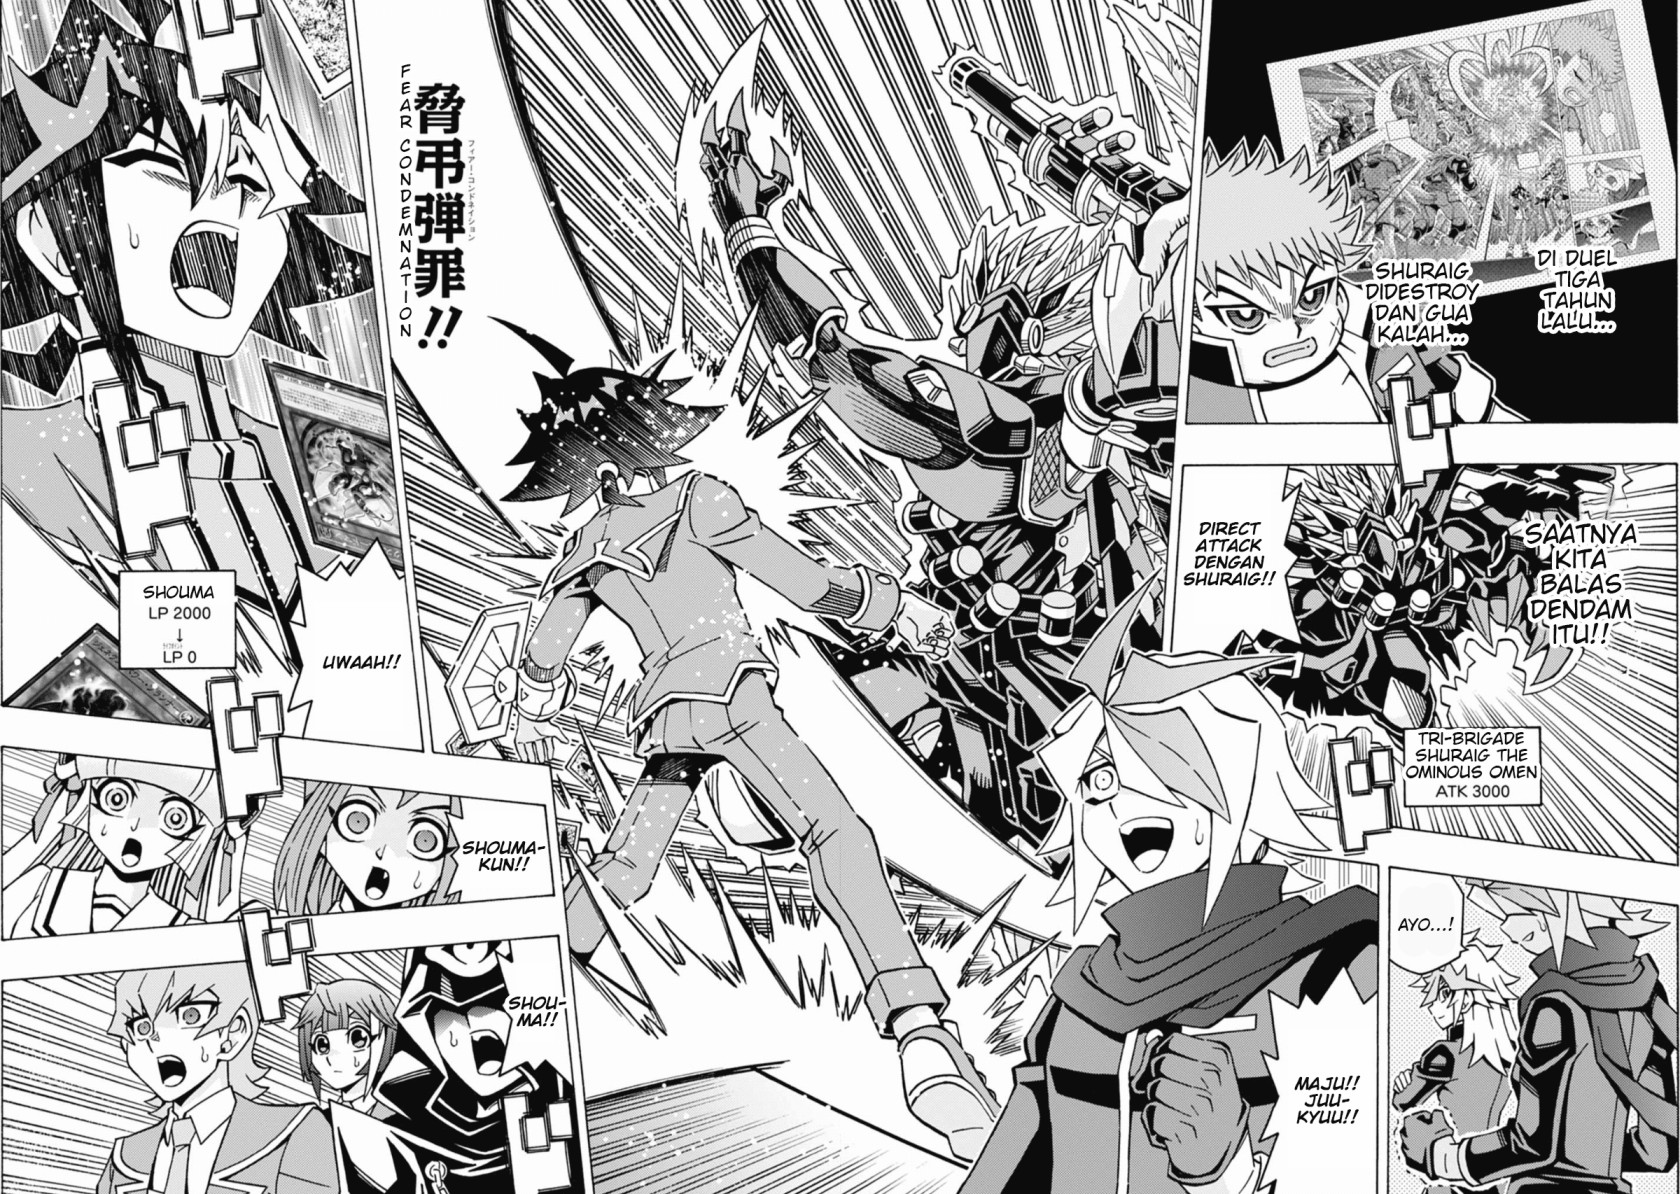 Yu-gi-oh! Ocg Structures Chapter 56